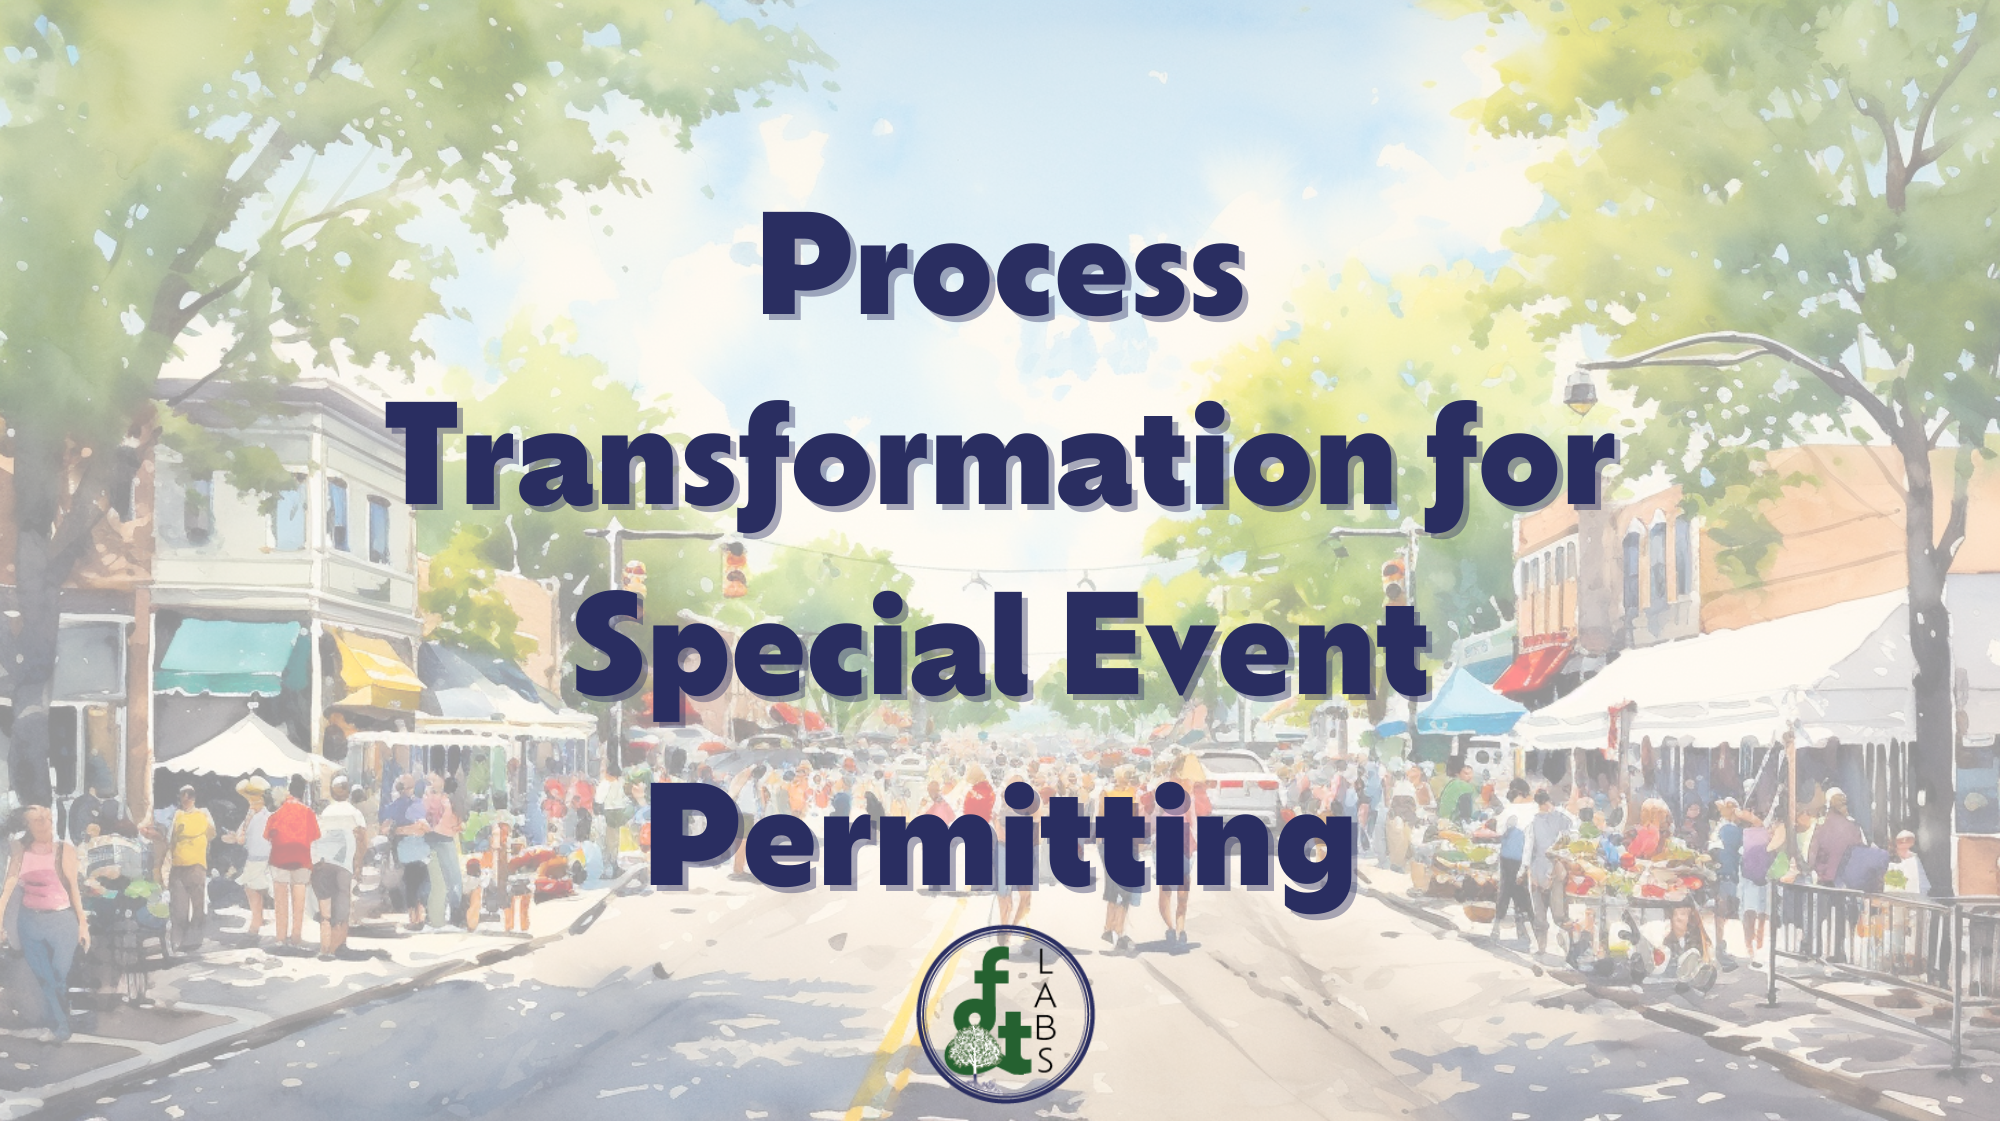 Process Transformation for Special Event Permitting